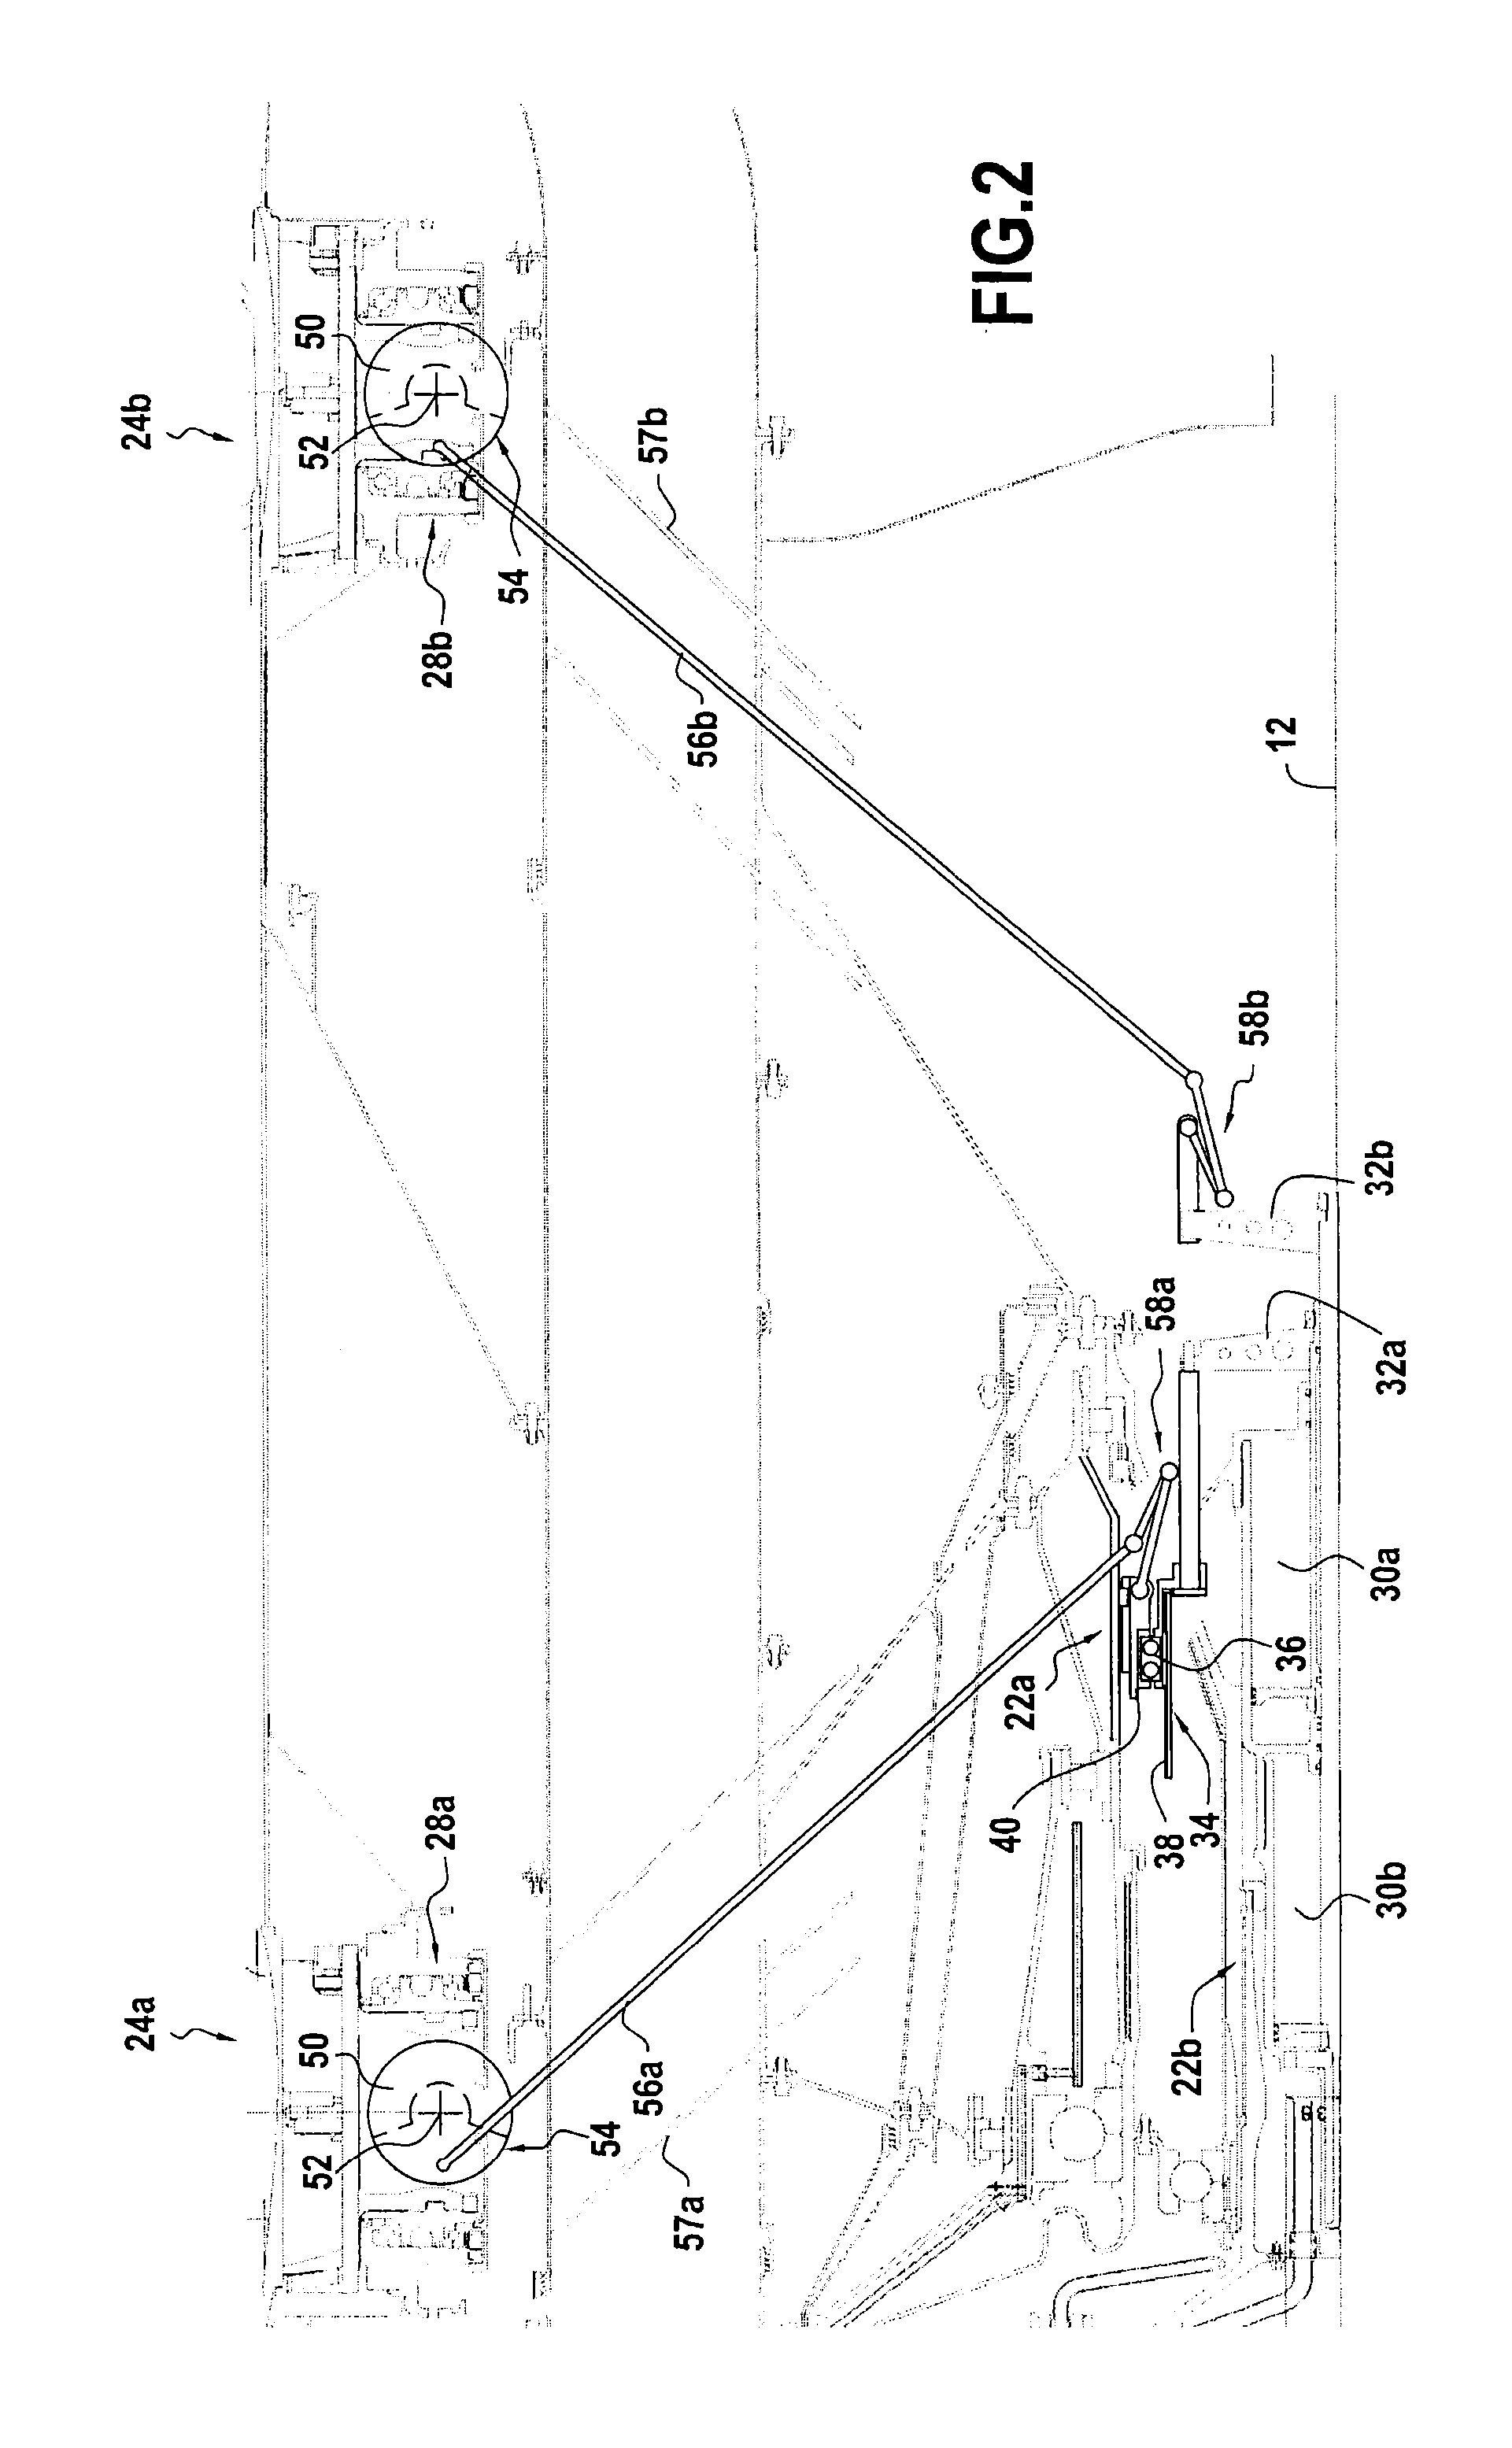 Counterweight-based device for controlling the orientation of fan blades of a turboprop engine